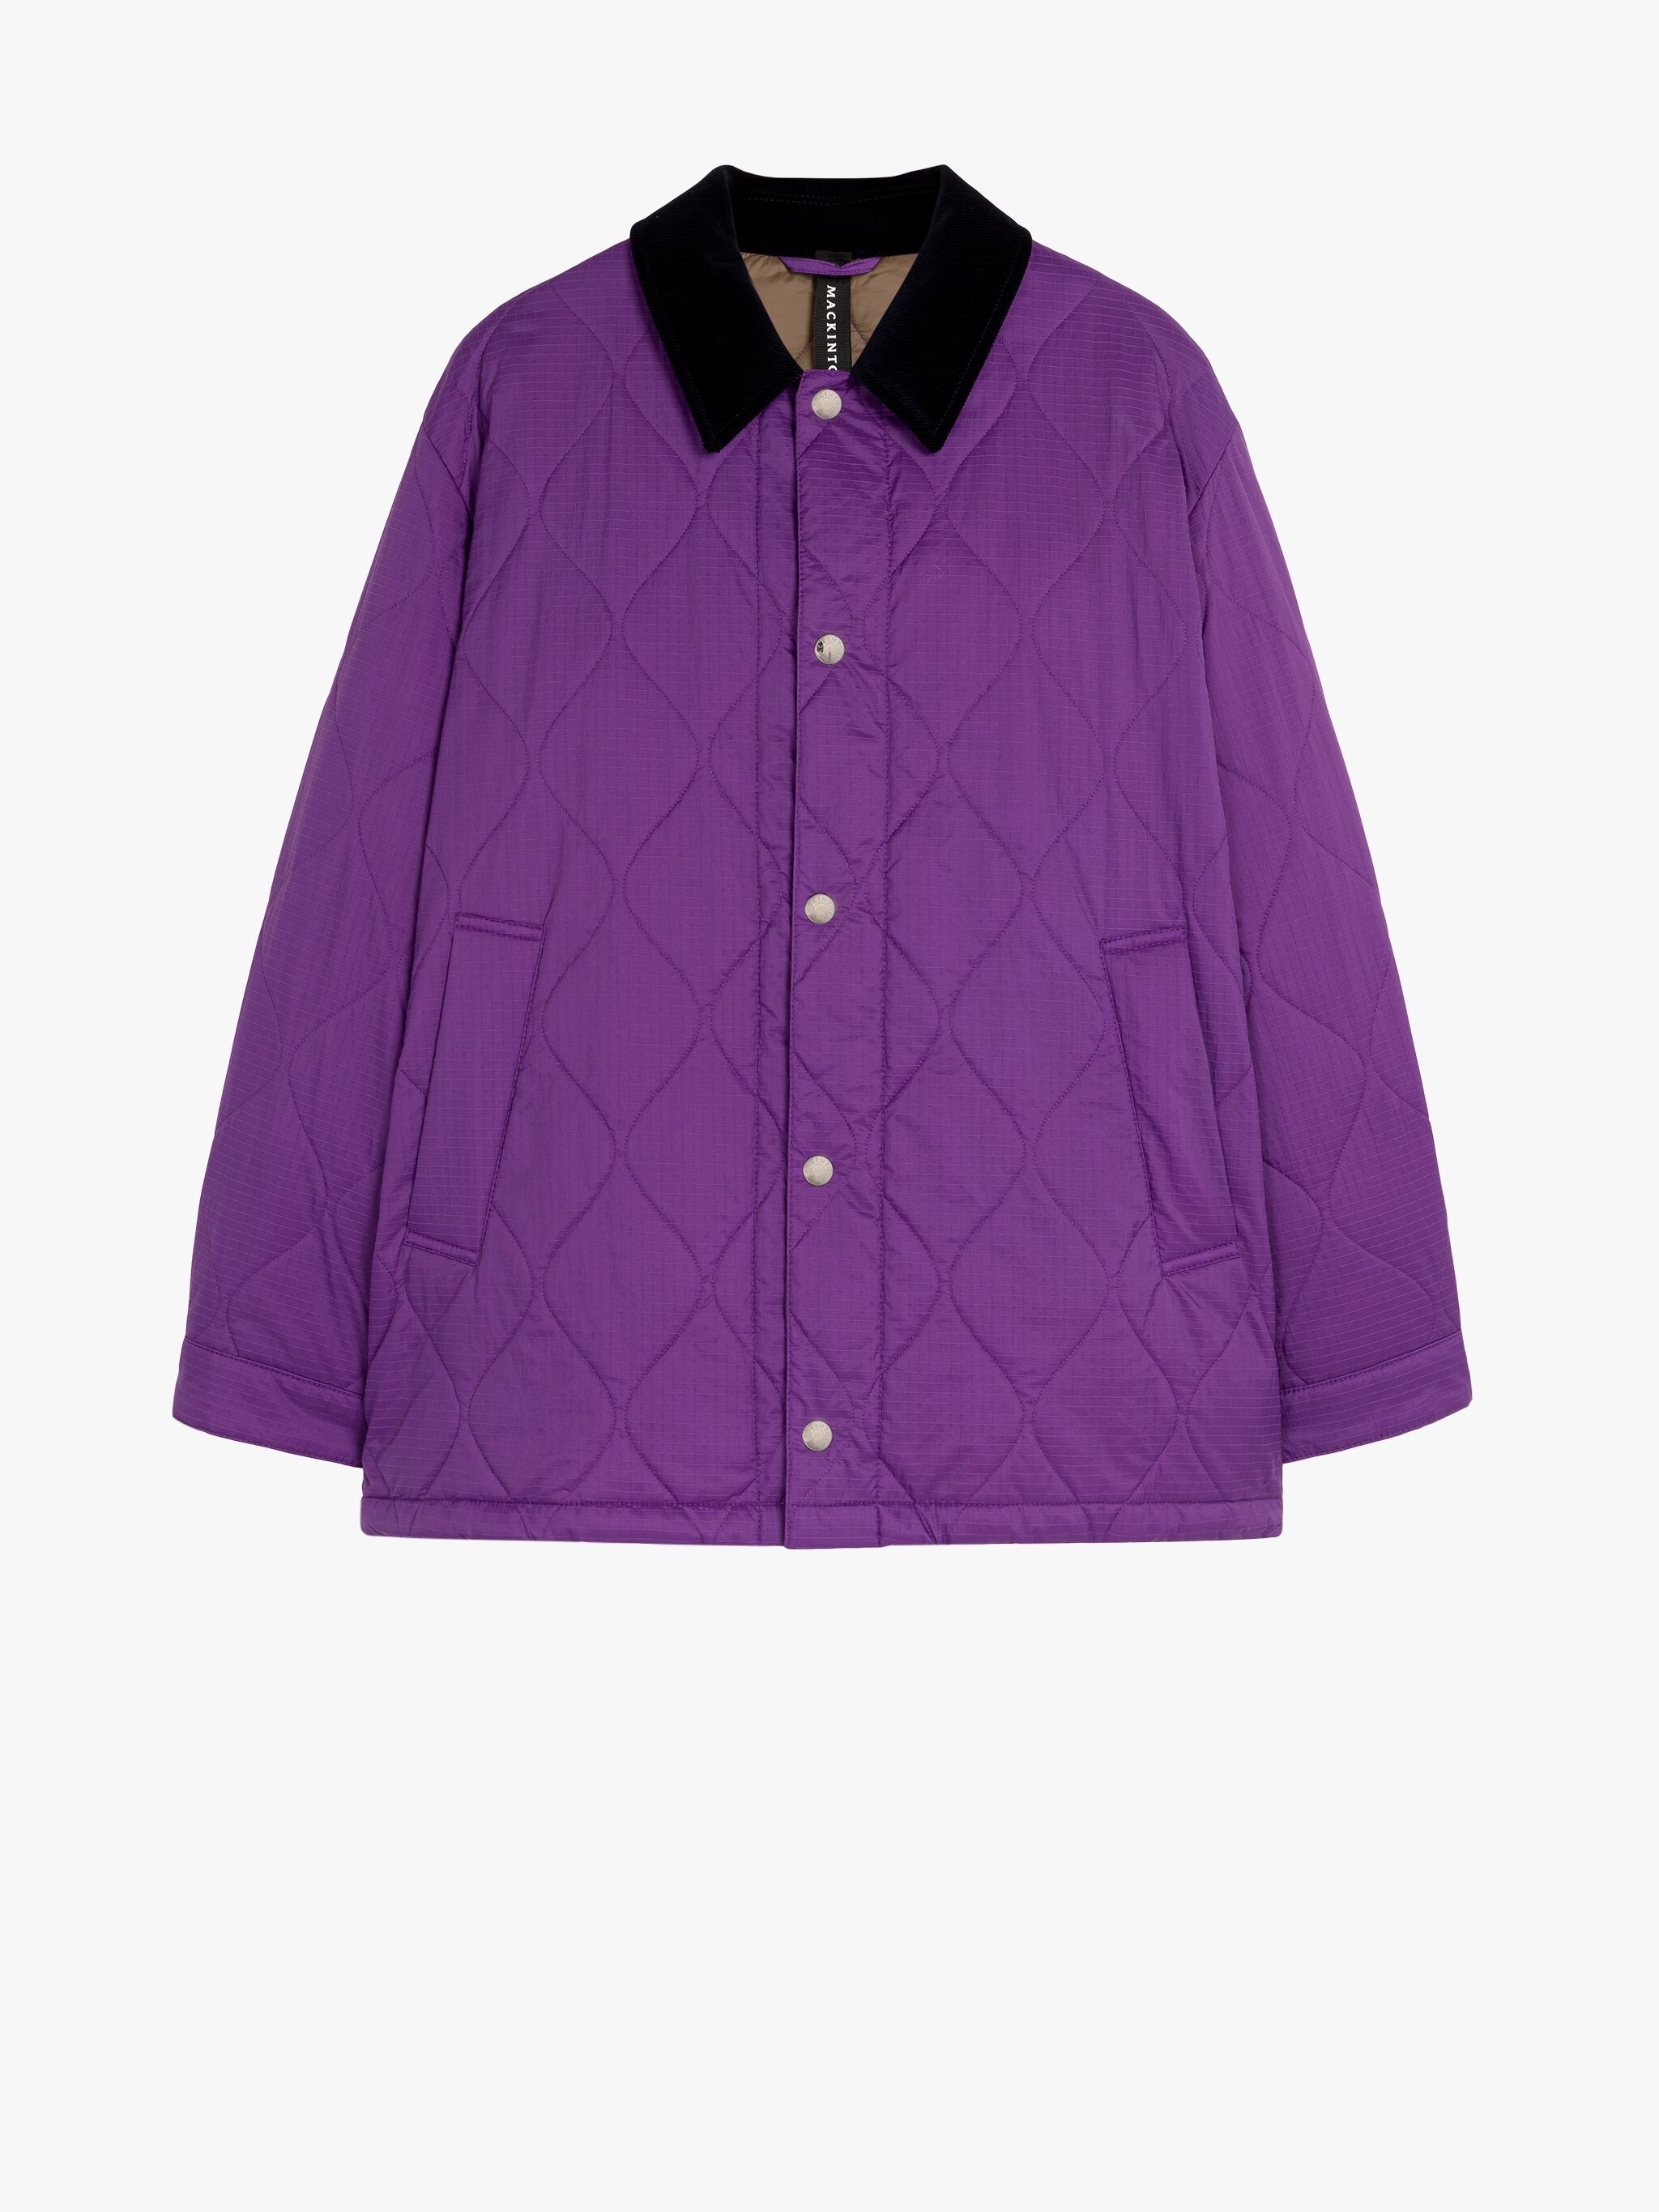 TEEMING PURPLE NYLON QUILTED COACH JACKET - 1